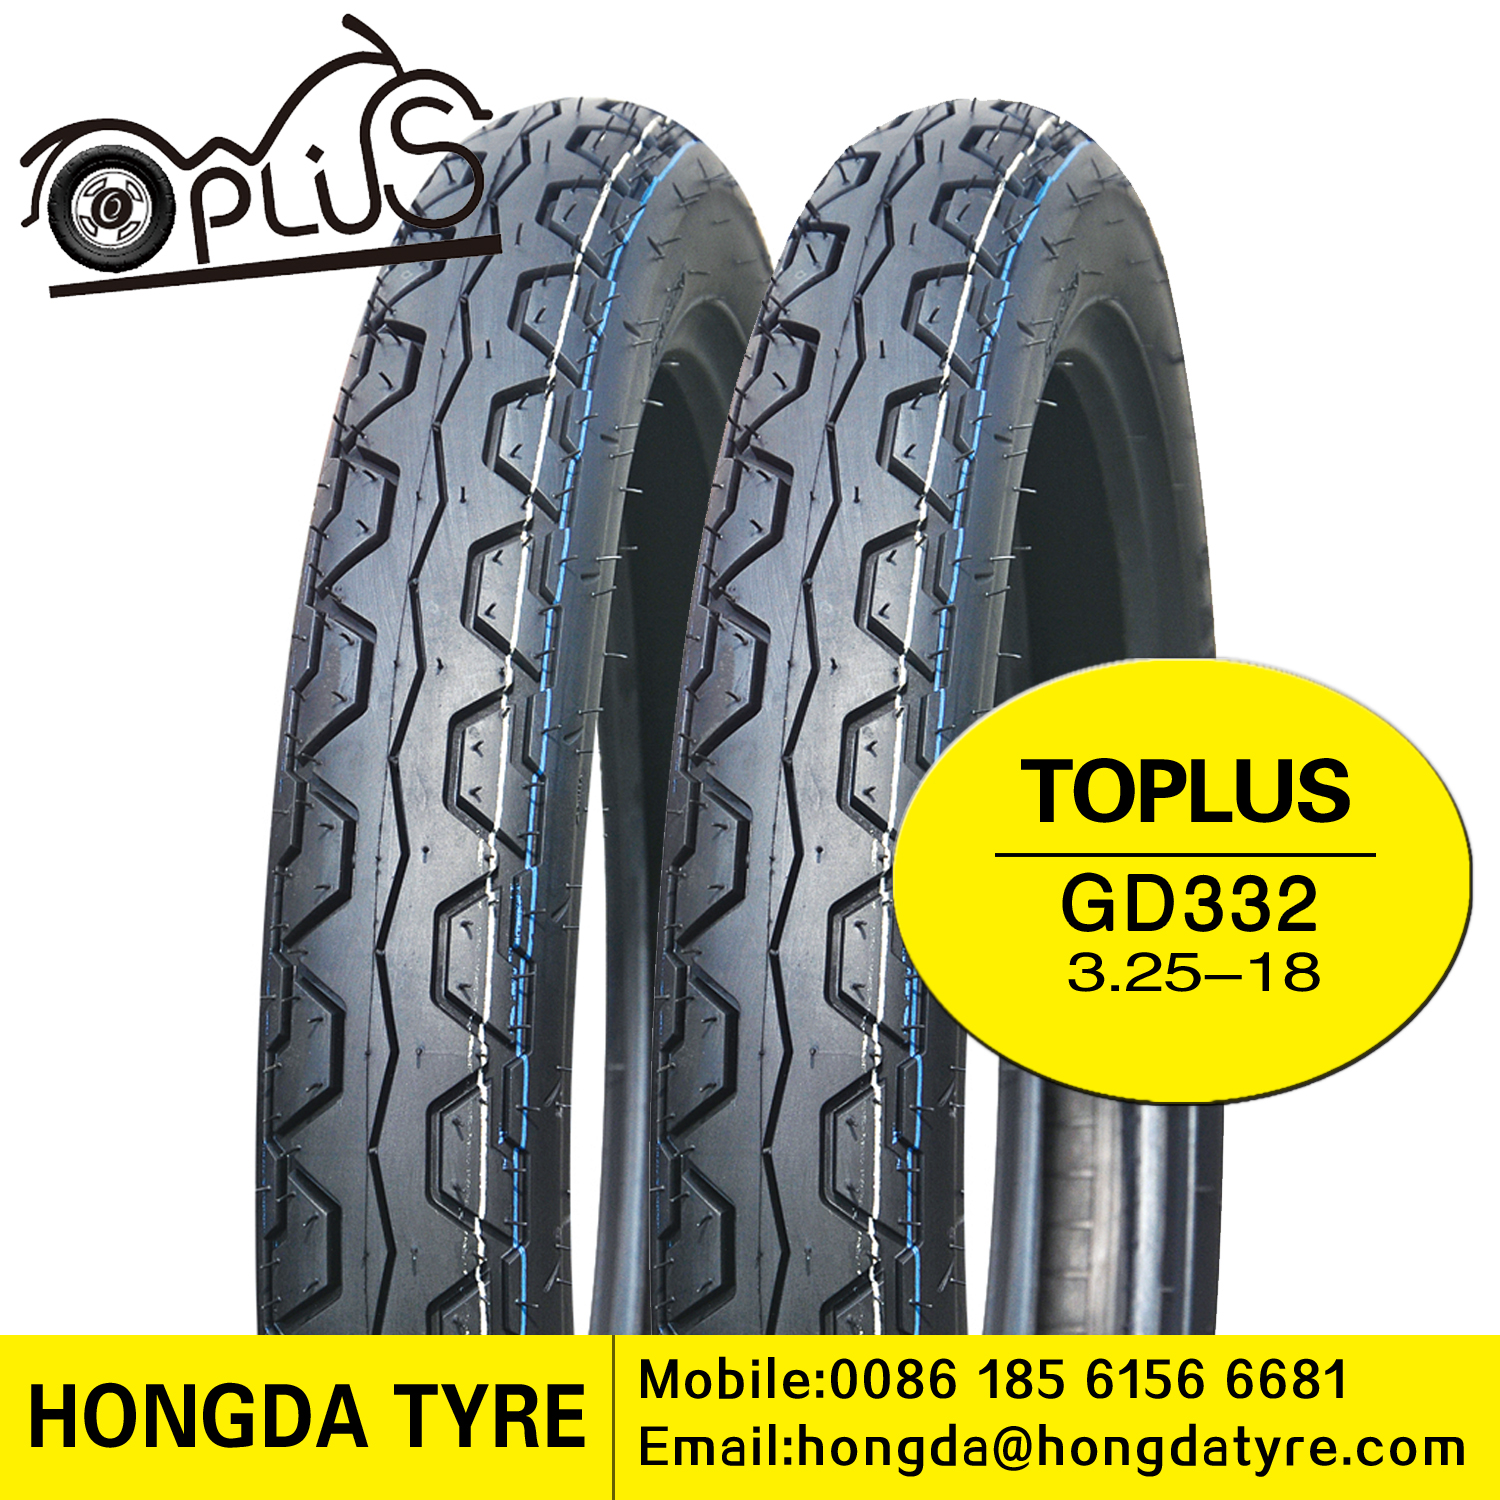 Motorcycle tyre GD332